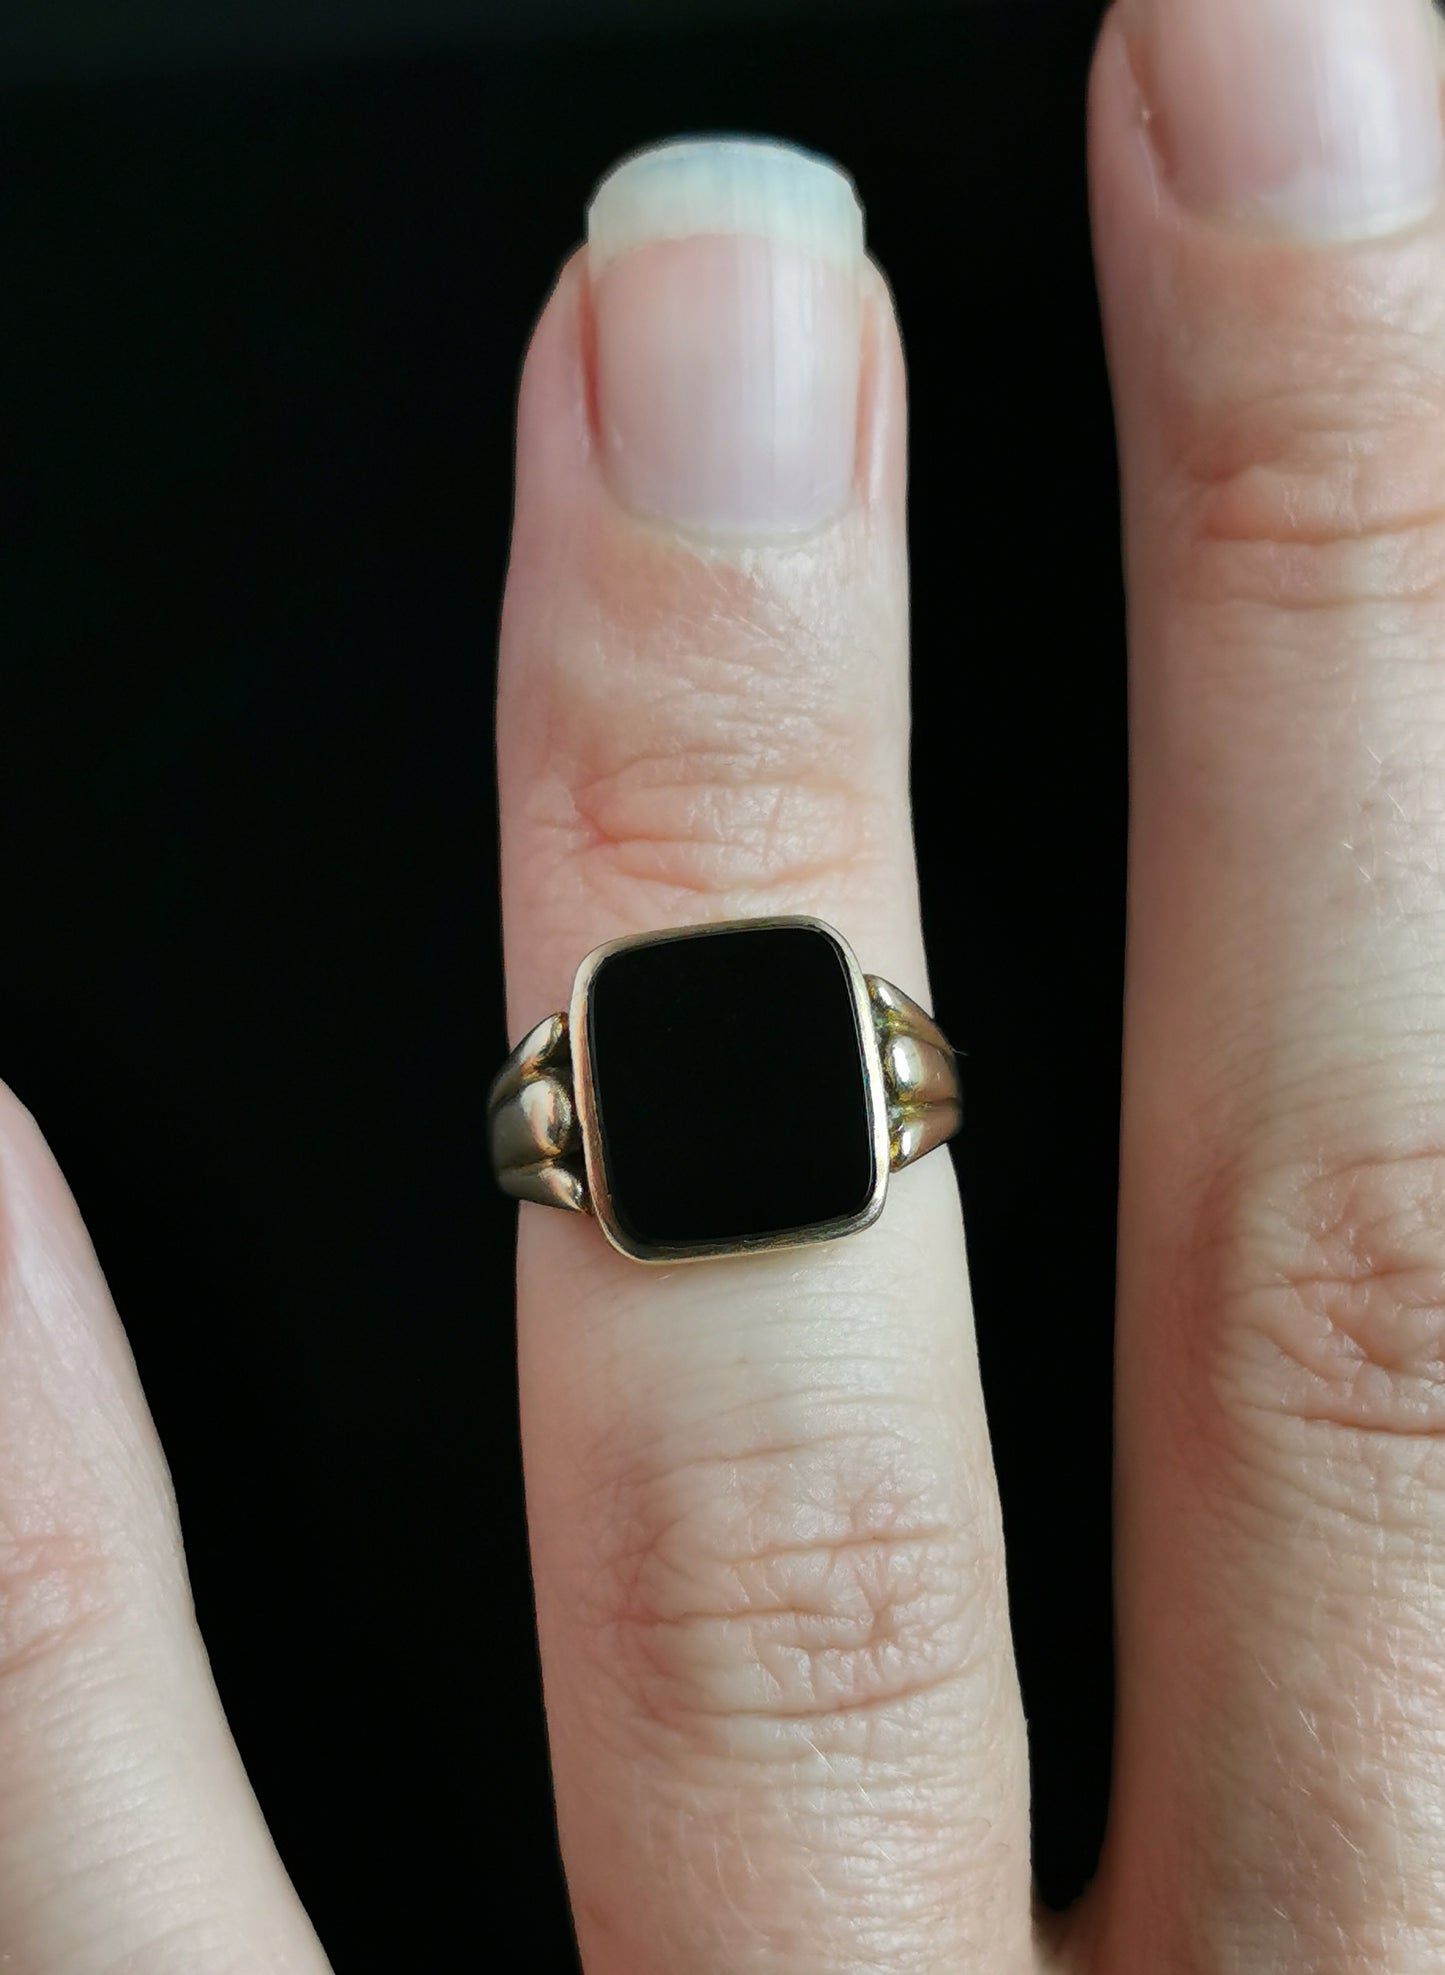 Vintage onyx signet ring, 9ct gold, pinky ring